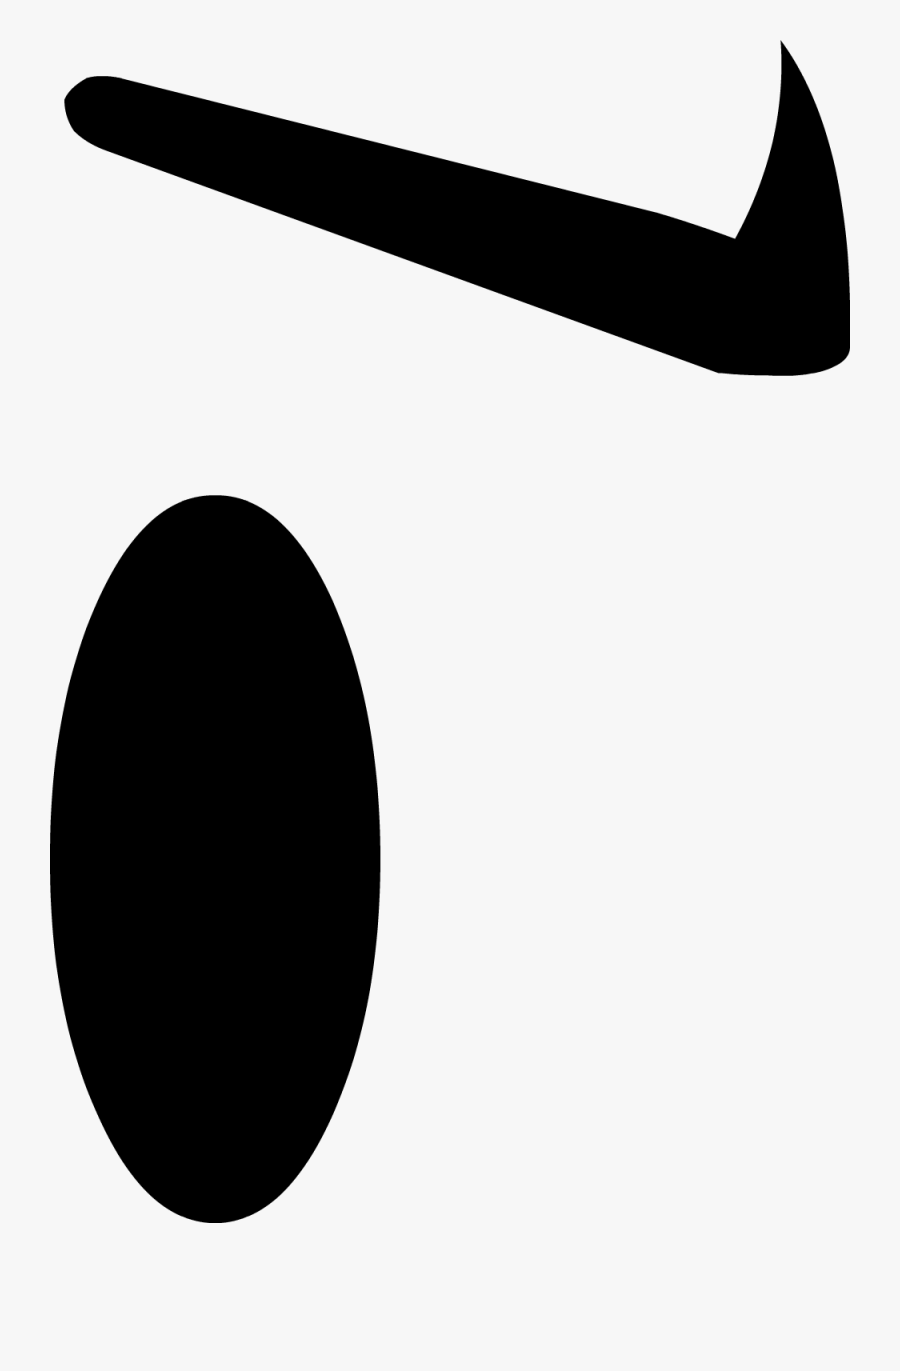 Angry Eye - Bfdi Angry Eyes Bfdi, Transparent Clipart